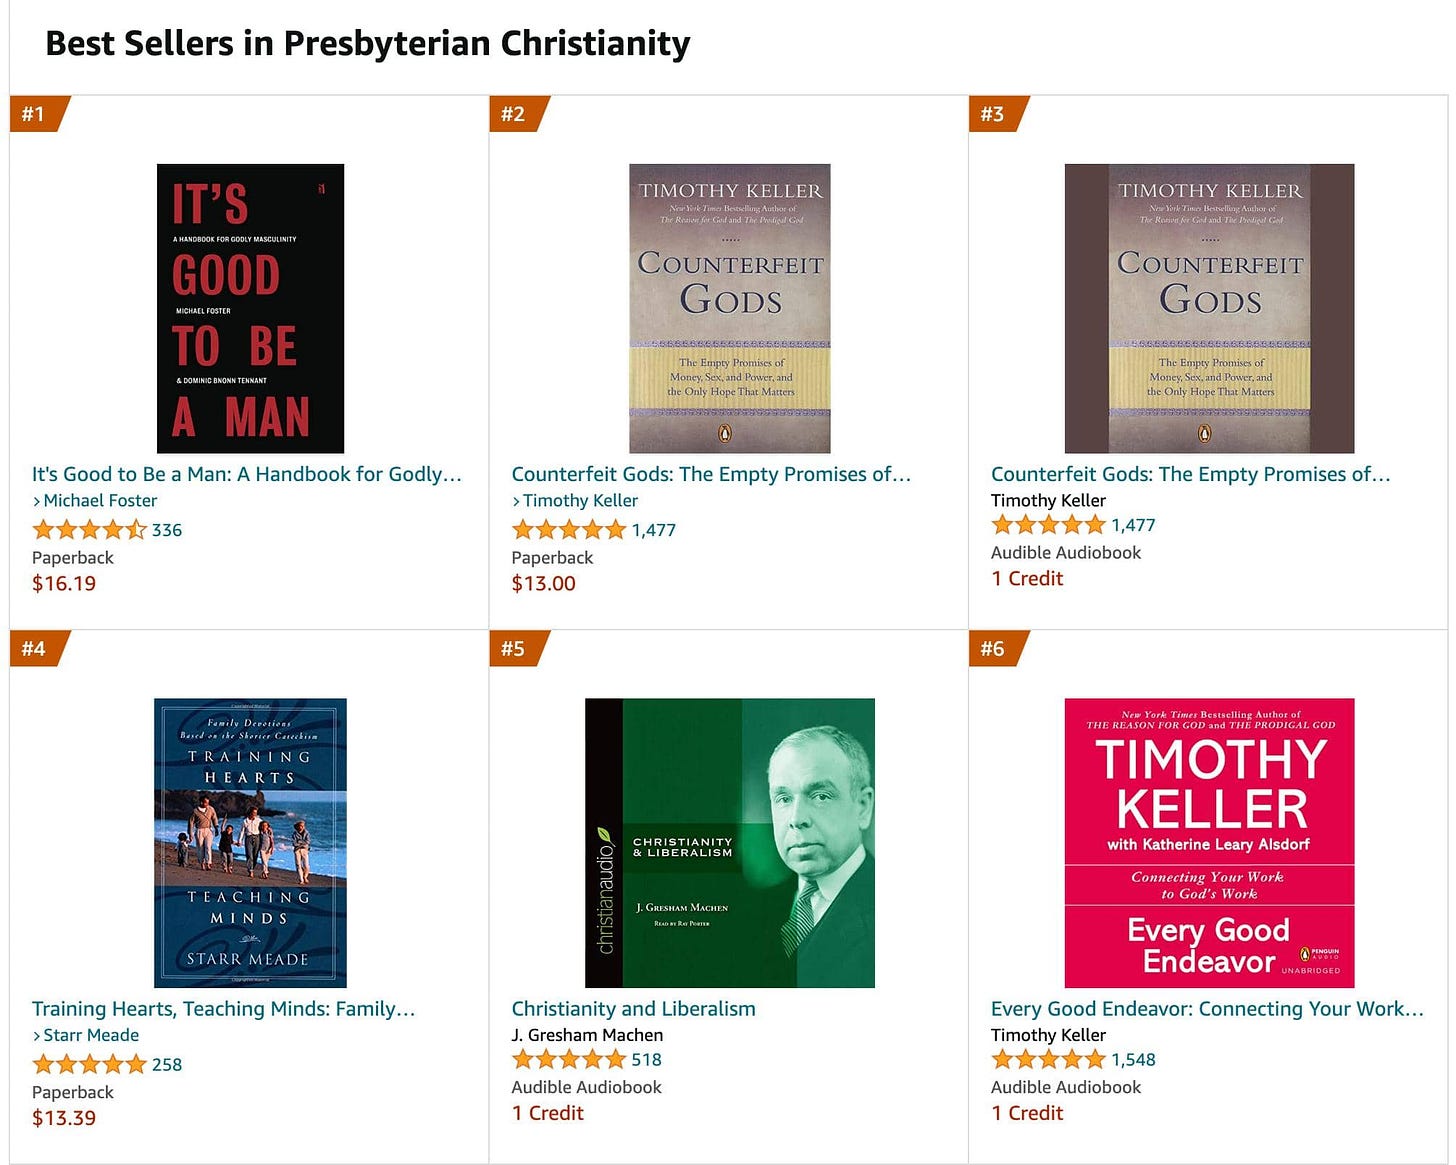 It’s Good To Be A Man bumped Tim Keller’s Counterfeit Gods off the top spot in Presbyterian books this week. Pretty funny